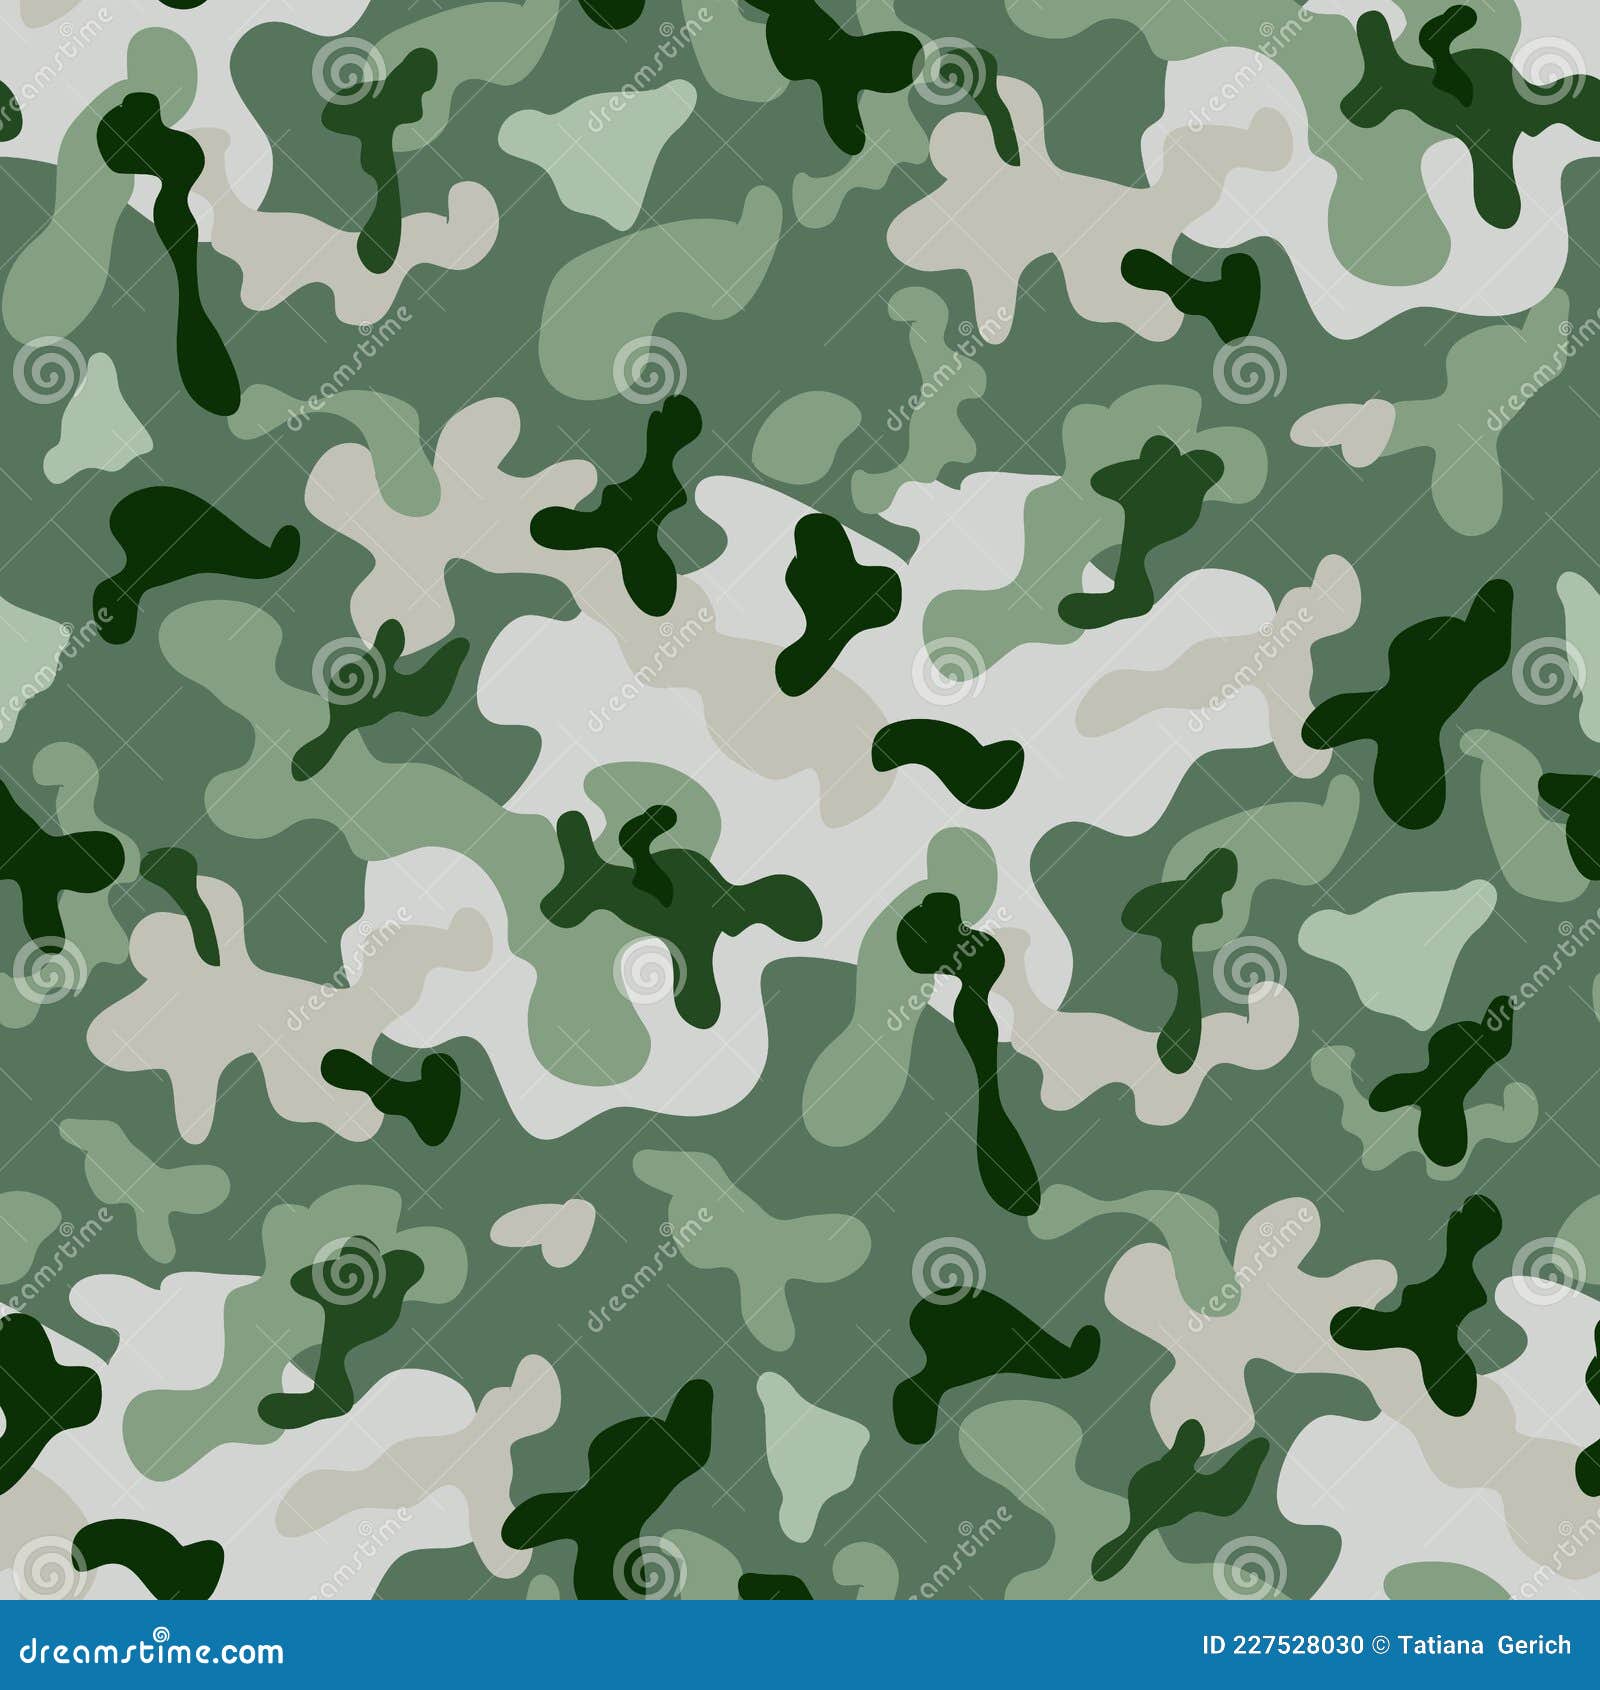 https://thumbs.dreamstime.com/z/camo-seamless-pattern-beautiful-camouflage-military-design-printing-packaging-textiles-paper-manufacturing-wallpapers-227528030.jpg